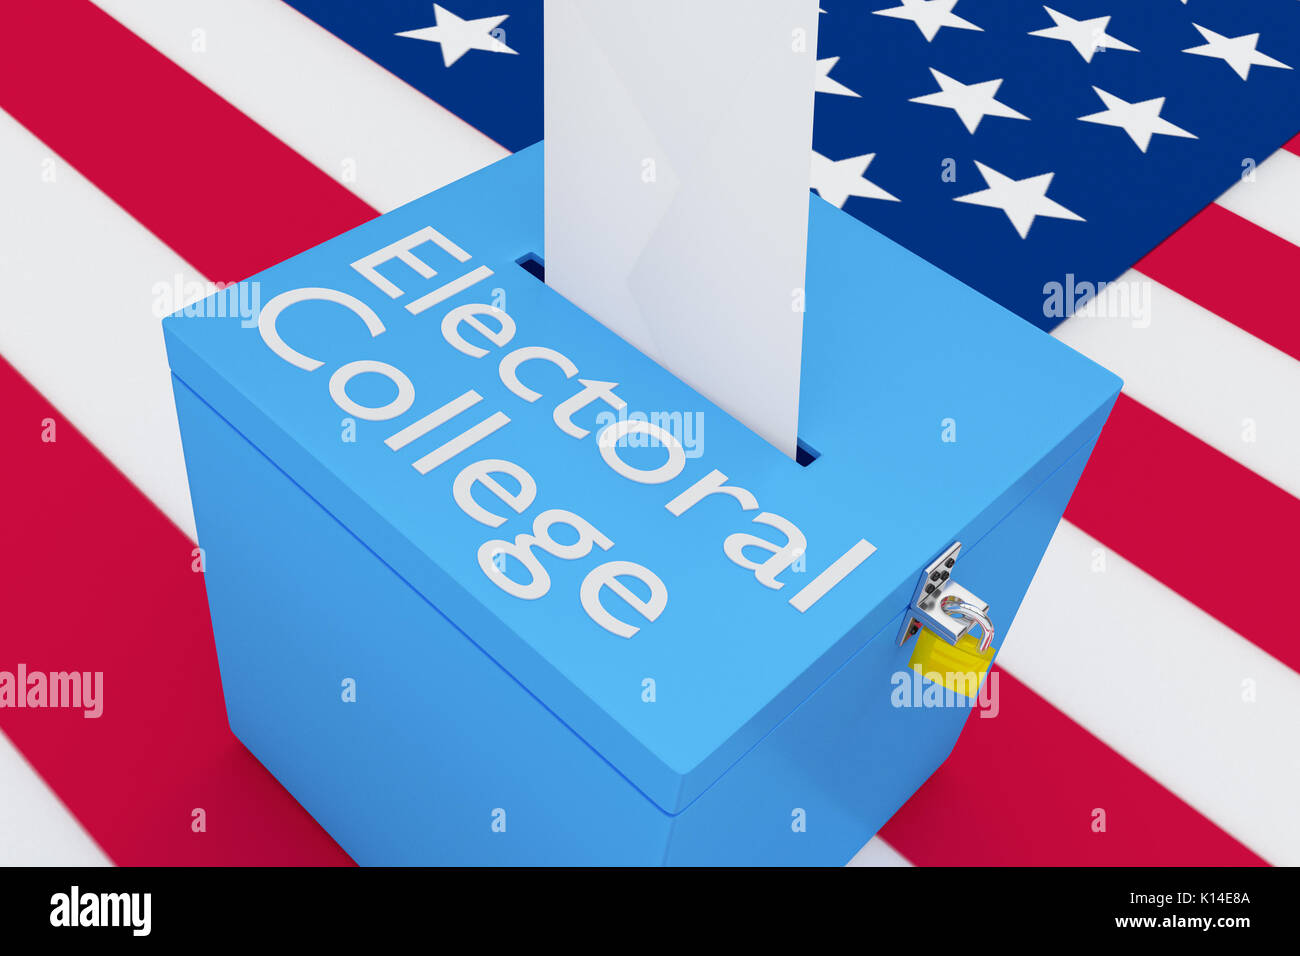 3D illustration of 'Electoral College' script on a ballot box, with US flag as a background. Stock Photo